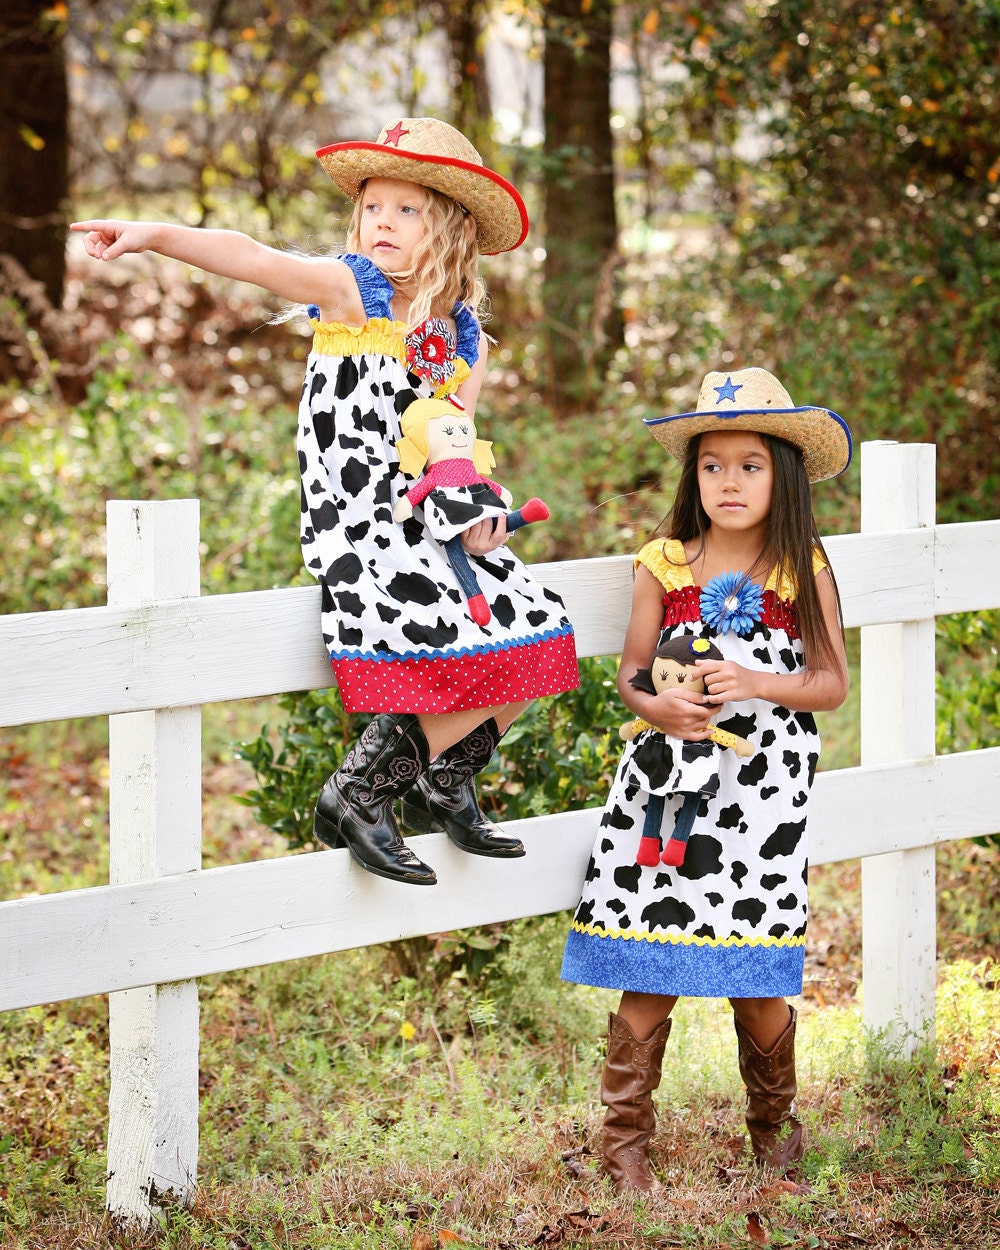 Disney dress cowgirl Jessie Toy Story Tween Birthday country fair Picnic AVAILABLE sizes 6m 9m 12m 18m 2t 3t 4t 5 6 7 8 10 12 - GinaBellas1